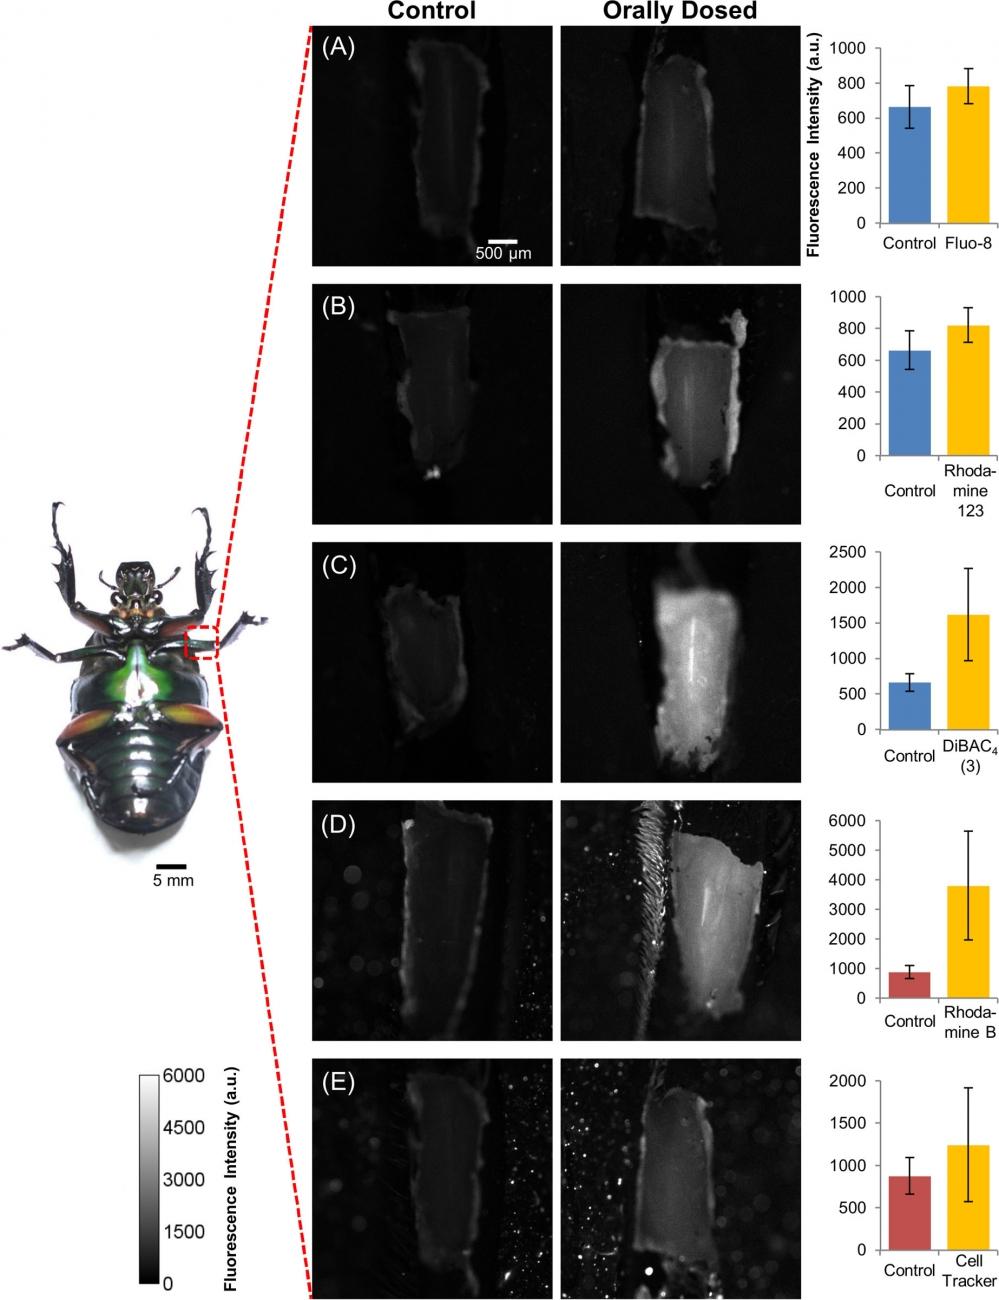 Difference in fluorescence intensity of insect flexion leg muscles of the control beetle and the beetle after oral dosing with chemical indicators. (A) Fluo-8; (B) Rhodamine 123; (C) DiBAC4(3); (D) Rhodamine B; and (E) Cell Tracker. The Fluo-8, Rhodamine 123, and DiBAC4(3) dosed beetle leg was observed under 460&ndash;480 nm excitation light and fluorescence emitted was collected within 495&ndash;540 nm. The Rhodamine B and Cell Tracker dosed beetle leg was observed under 535&ndash;555 nm excitation light and fluorescence emitted was collected within 570&ndash;625 nm. Fluorescence intensity was measured at the 2 regions of interest (ROIs) shown in S1A Fig. The images obtained were digitized by ImageJ software, and the averaged intensity is shown in each bar graph. The graphs in the right column show the fluorescence intensities of each beetle leg dosed with different chemical indicators (center) compared with the control (left) beetle leg. The control beetles were fed with the home-made jelly (no chemical indicator added) for 2 days prior to observation. The error bars represent the standard deviation (S.D.) (N = 5 beetles, n = 30 beetle legs for control, DiBAC4(3), Rhodamine B, and Rhodamine 123; N = 9 beetles, n = 30 beetle legs for Fluo-8 and Cell Tracker). Each data set was compared with control leg data set by student&rsquo;s t-test (Fluo-8, p = 1.42&times;10-4; Rhodamine 123, p = 4.65&times;10-5; DiBAC4(3), p = 6.26&times;10-9; Rhodamine B, p = 1.15&times;10-9 and Cell Tracker, p = 7.10&times;10-3). The color scale is given on the bottom left corner of the image. The increase in fluorescence intensity for the chemical indicator-dosed beetle compared with the control beetle indicates that the oral dosing method successfully administers and delivers various chemical indicators in order to label the beetle leg muscle.&nbsp;Source: Graph from <strong>Oral Dosing of Chemical Indicators for In Vivo Monitoring of Ca<sup>2+</sup> Dynamics in Insect Muscle</strong> by Ferdinandus et al., <em>PLOS</em>, Jan. 2015.